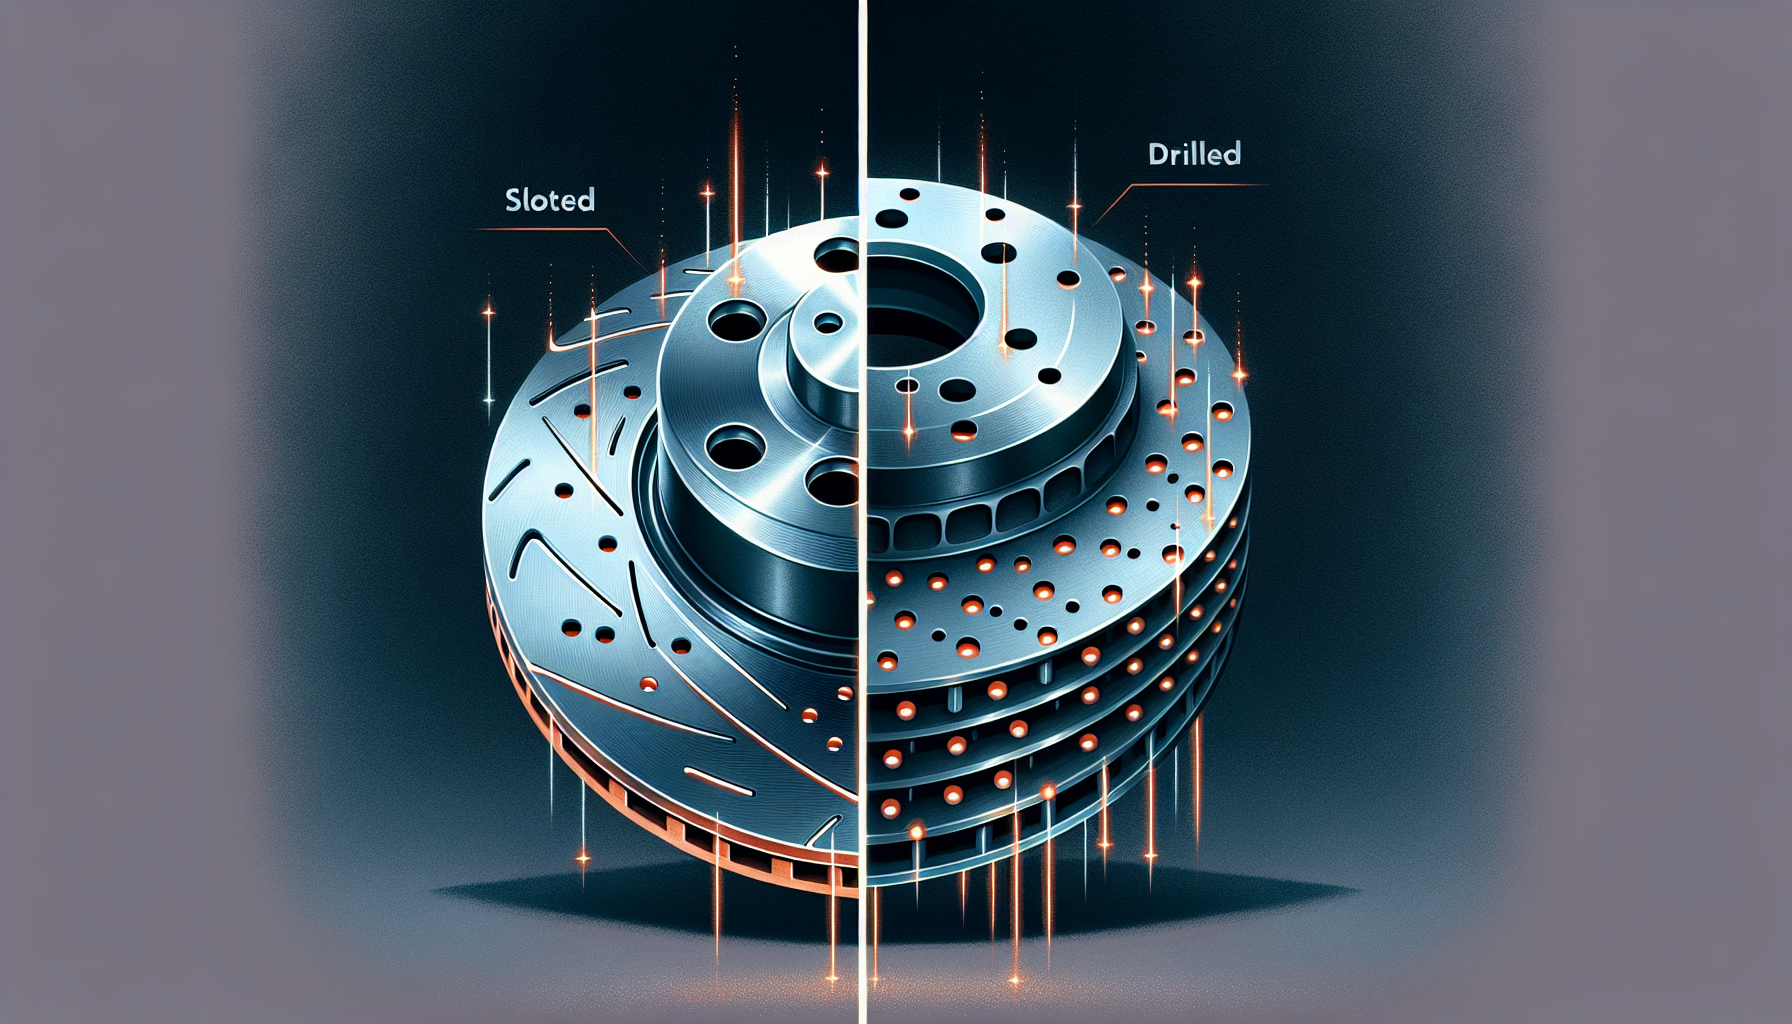 Comparison of slotted and drilled brake rotors for daily driving